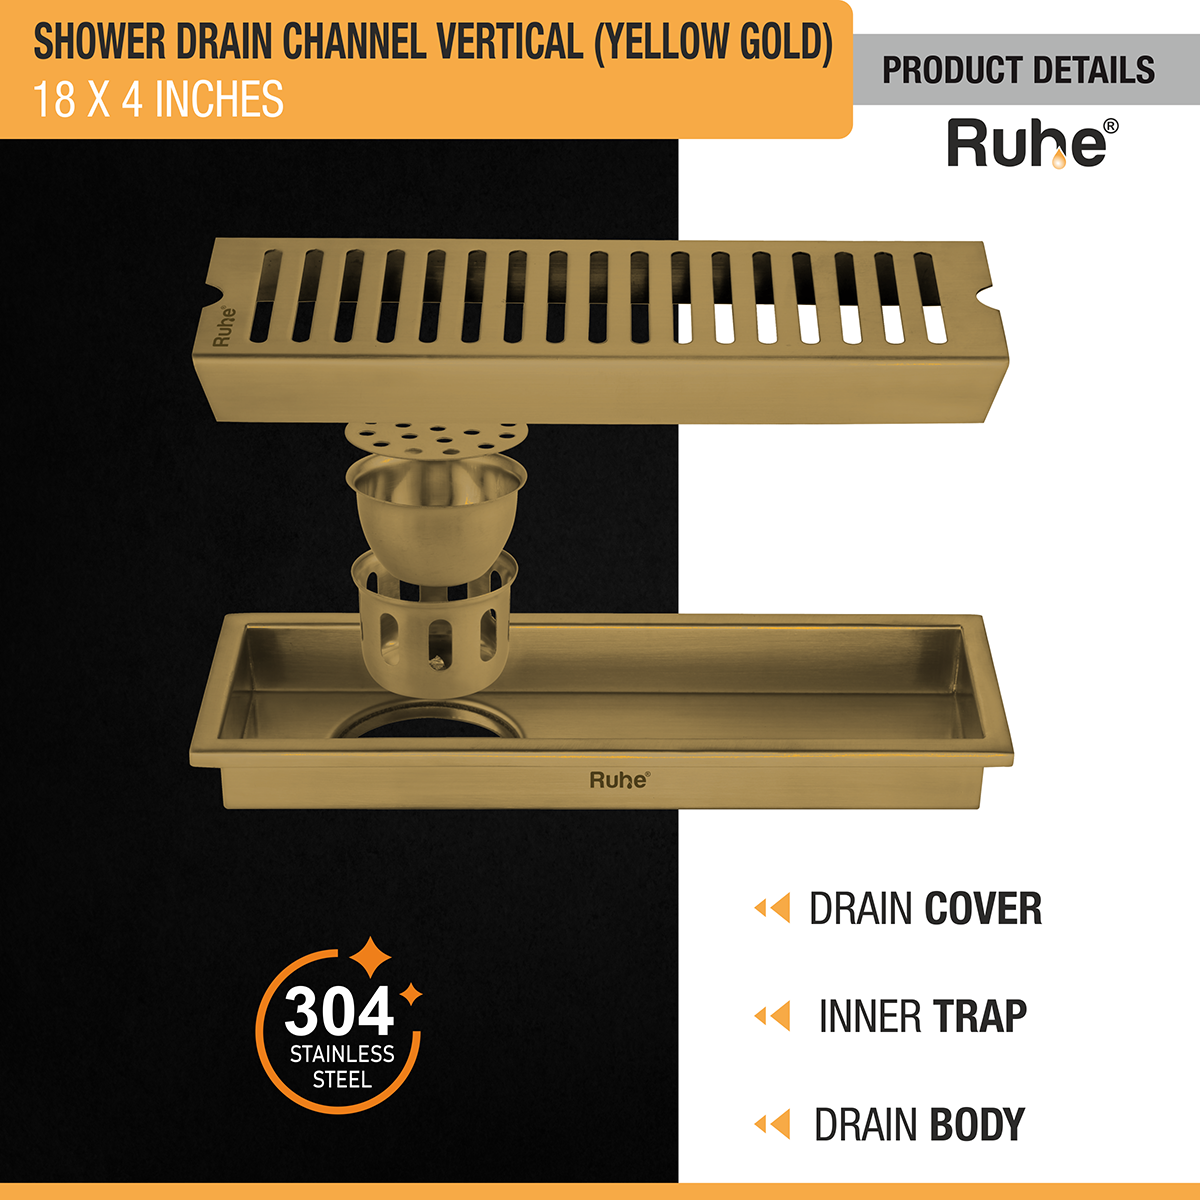 Vertical Shower Drain Channel (18 x 4 Inches) YELLOW GOLD product details